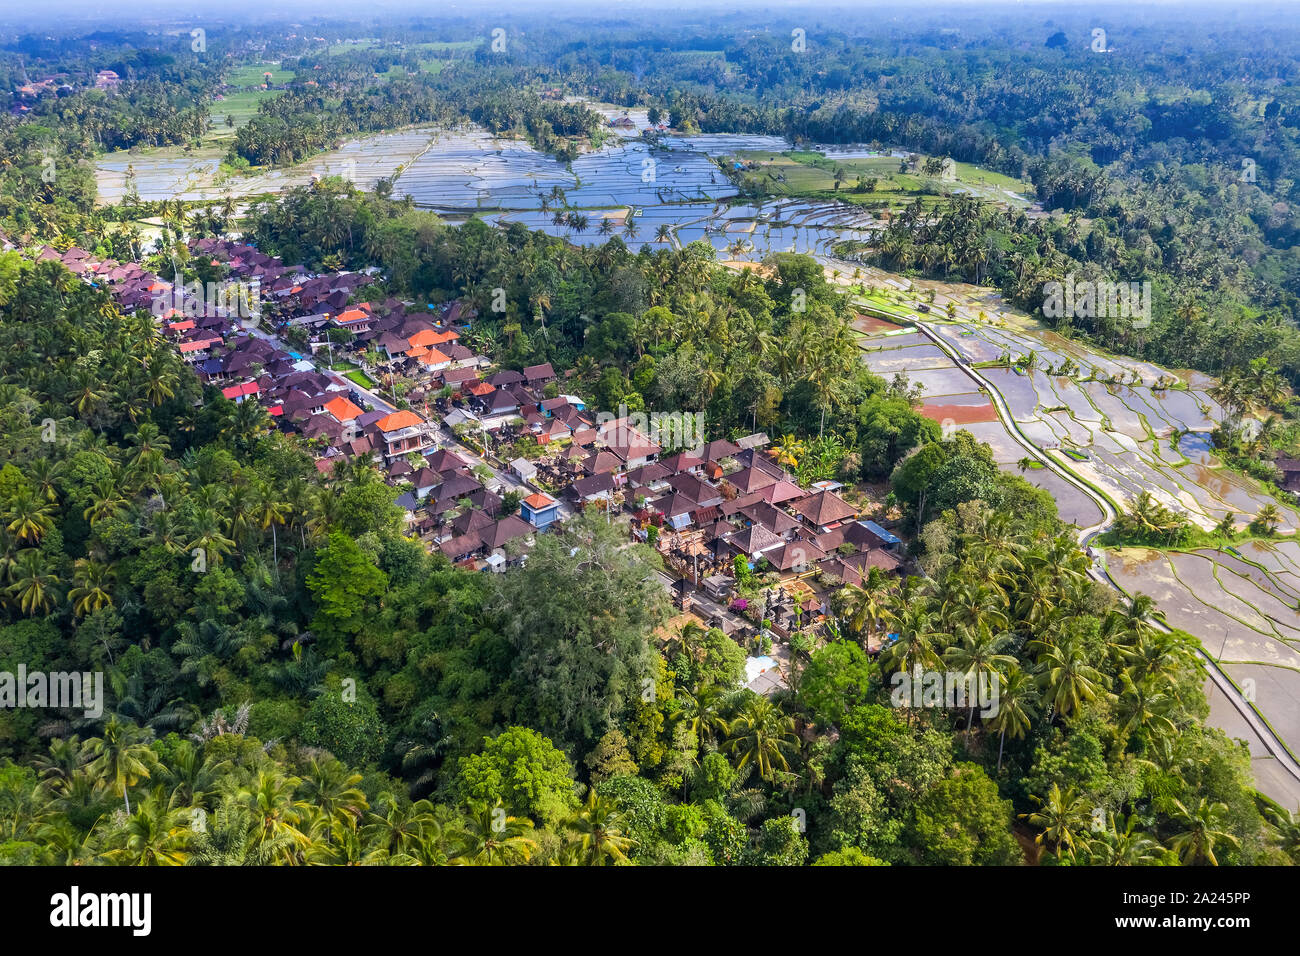 Aerial View of Tegallalang village and Rice Field Terrace, Bandung, West Java Indonesia, Asia. Royalty high quality free stock image of Bali. Stock Photo